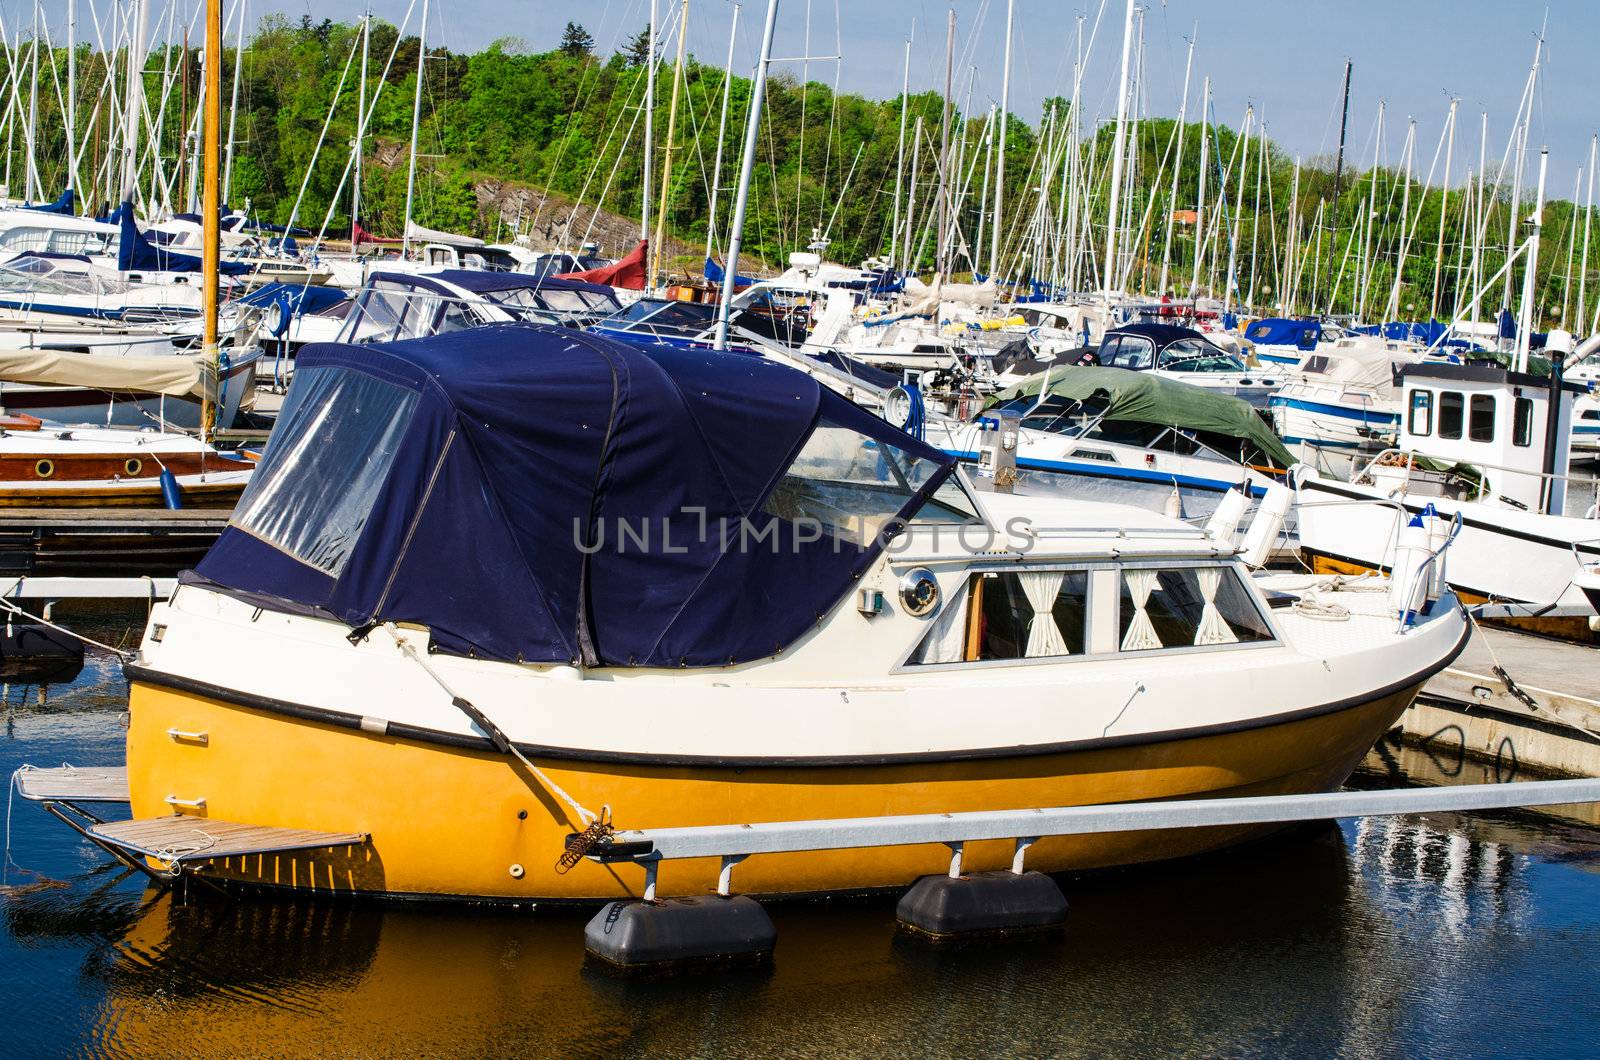 Old yellow boat  in the harbor  by Nanisimova